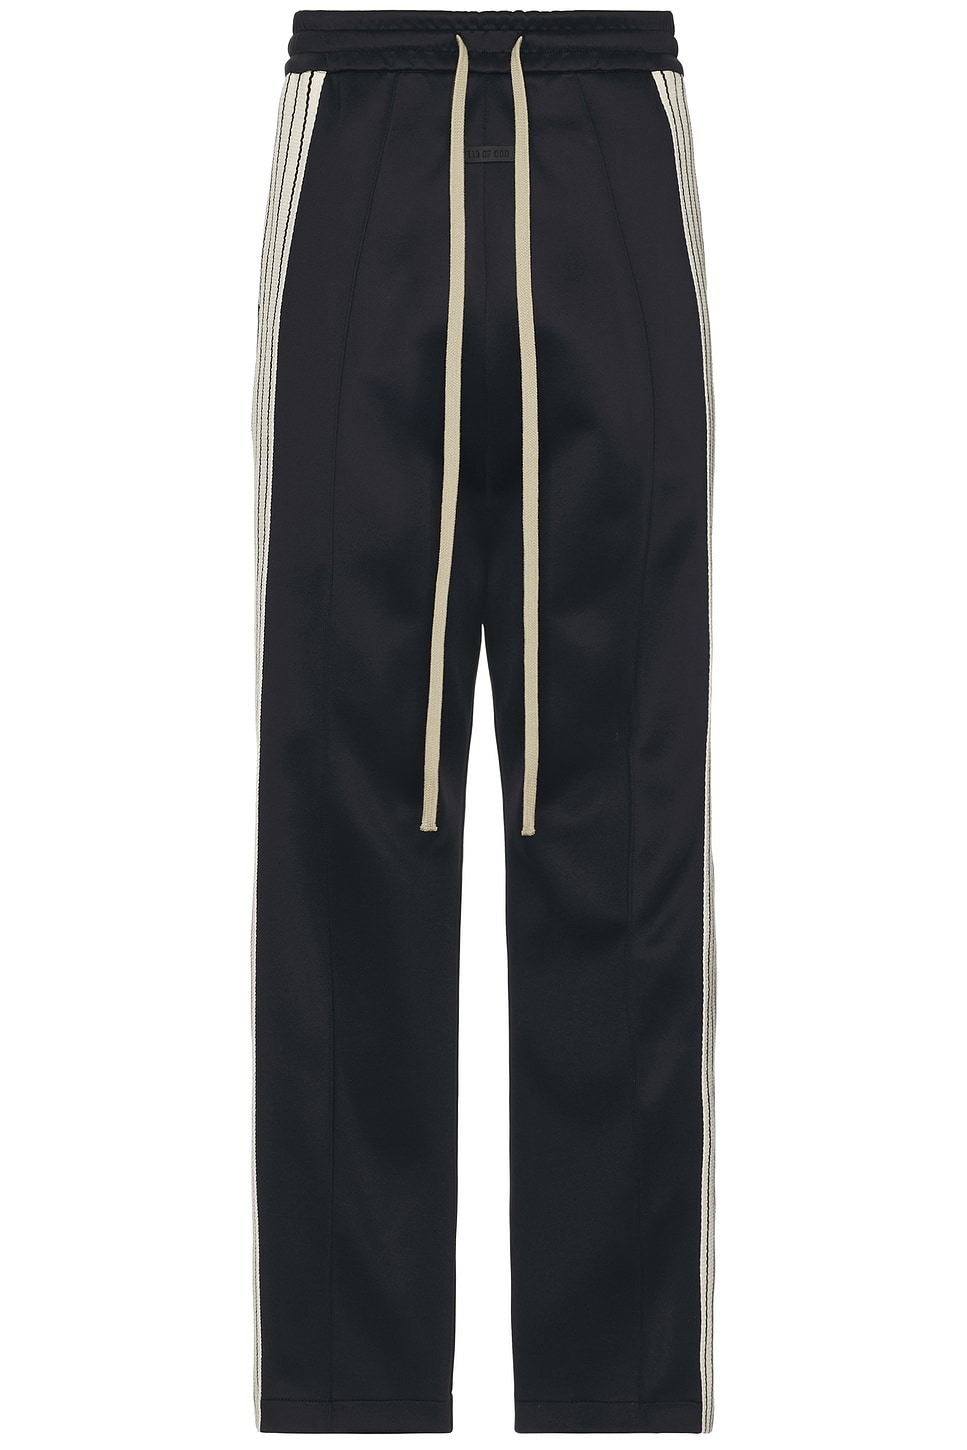 Image 1 of Fear of God Pintuck and Stripe Relaxed Sweatpant in Black